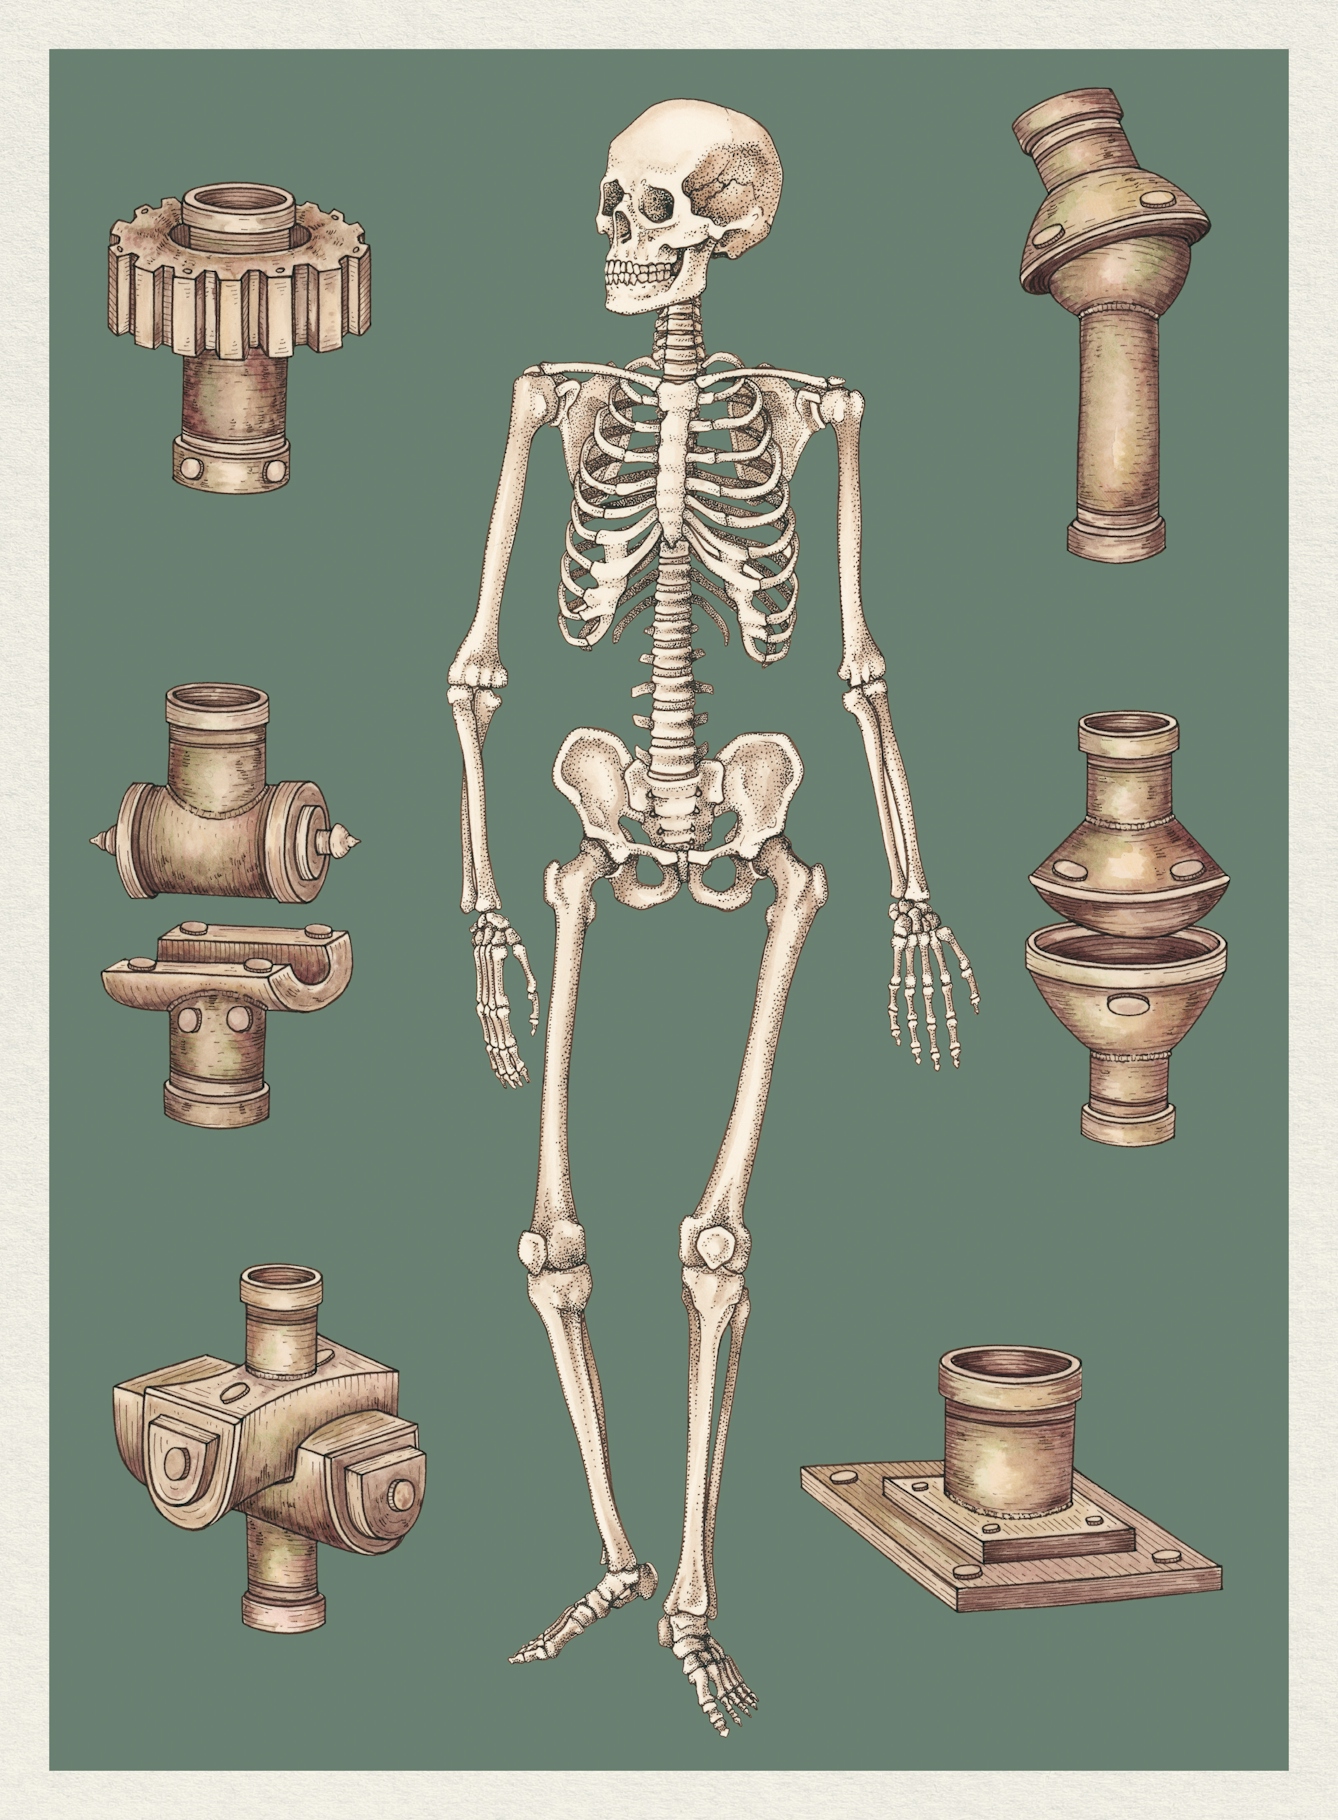 Illustration showing the joints in the human body